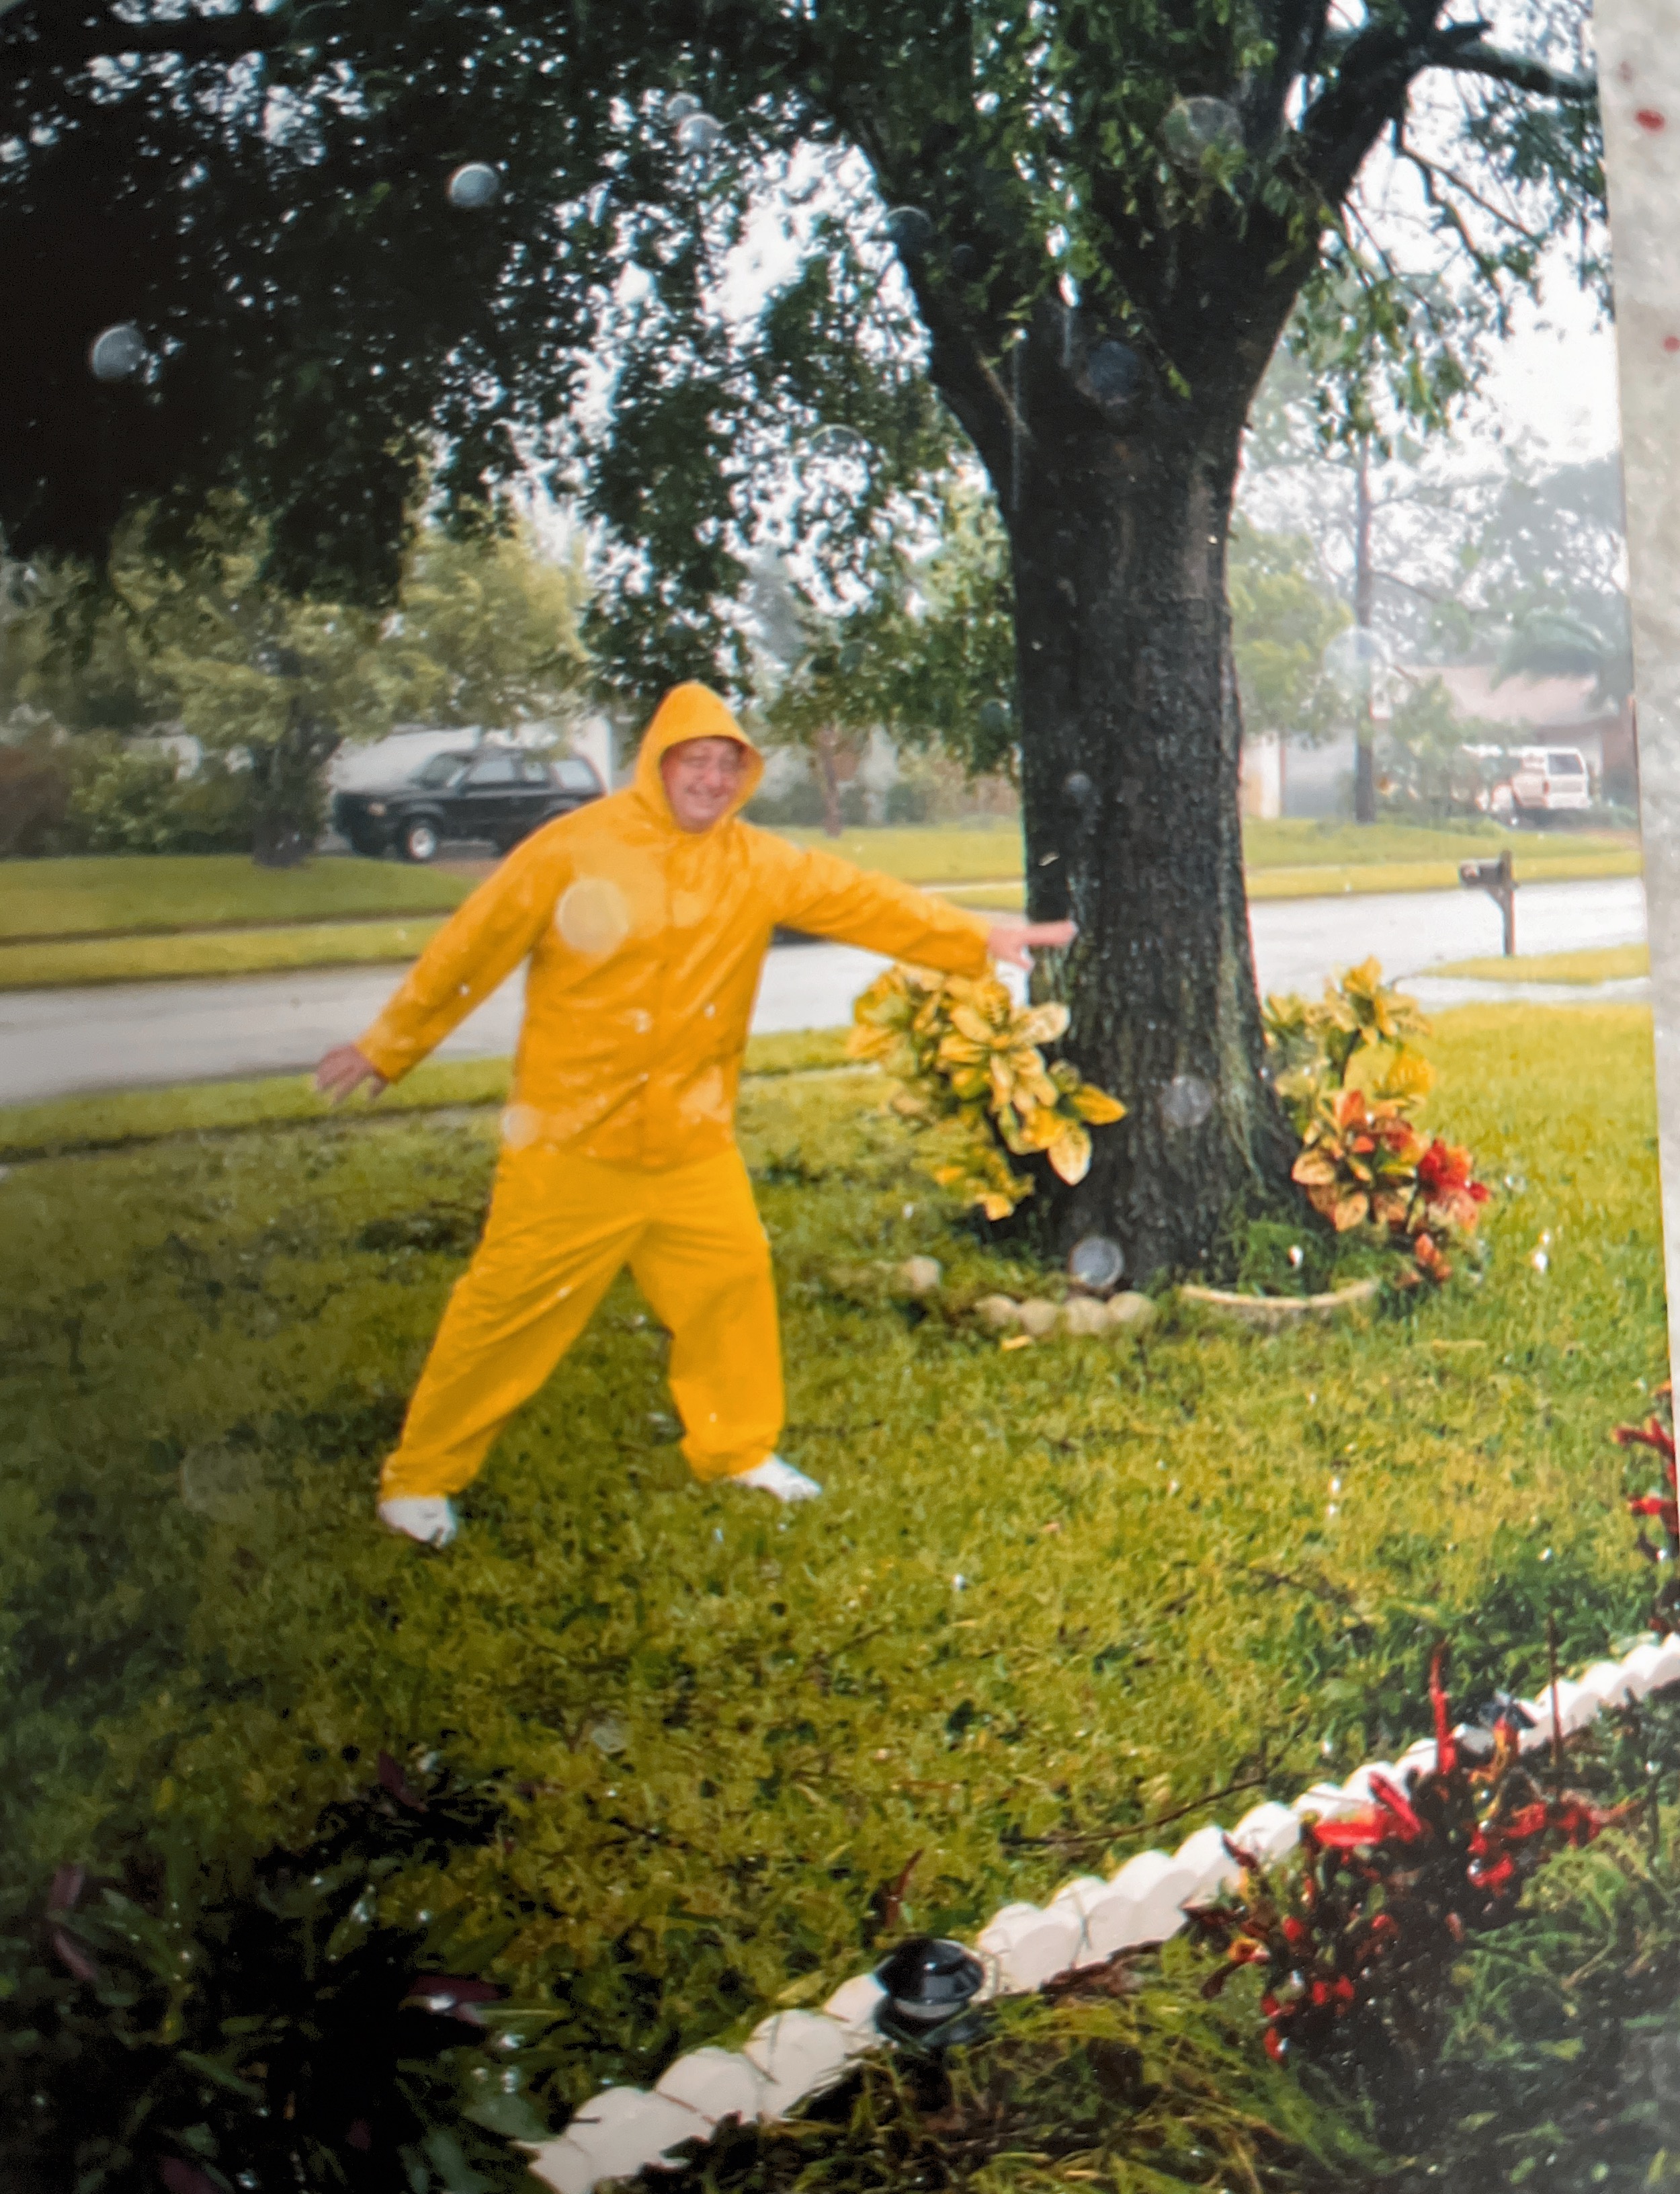 My dad couldn’t stand being stuck inside. So during Hurricane Frances in 2004, he put on his getup and went out!